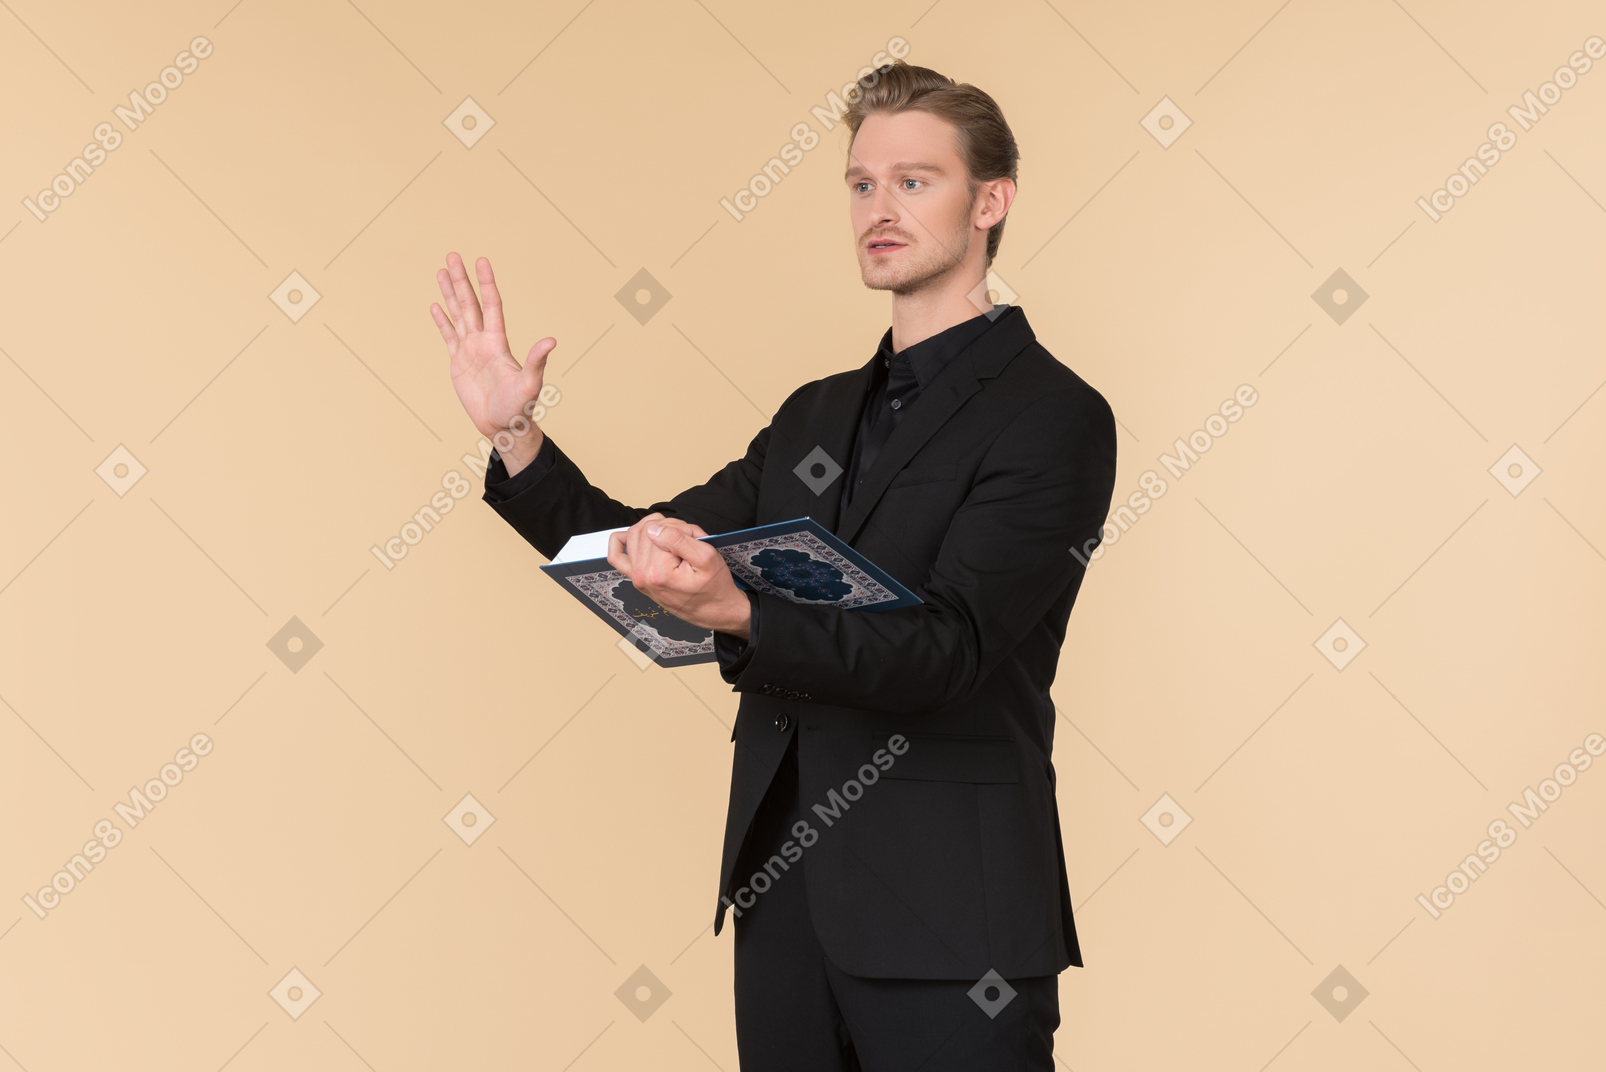 A white man in a fully black suit holding the quran